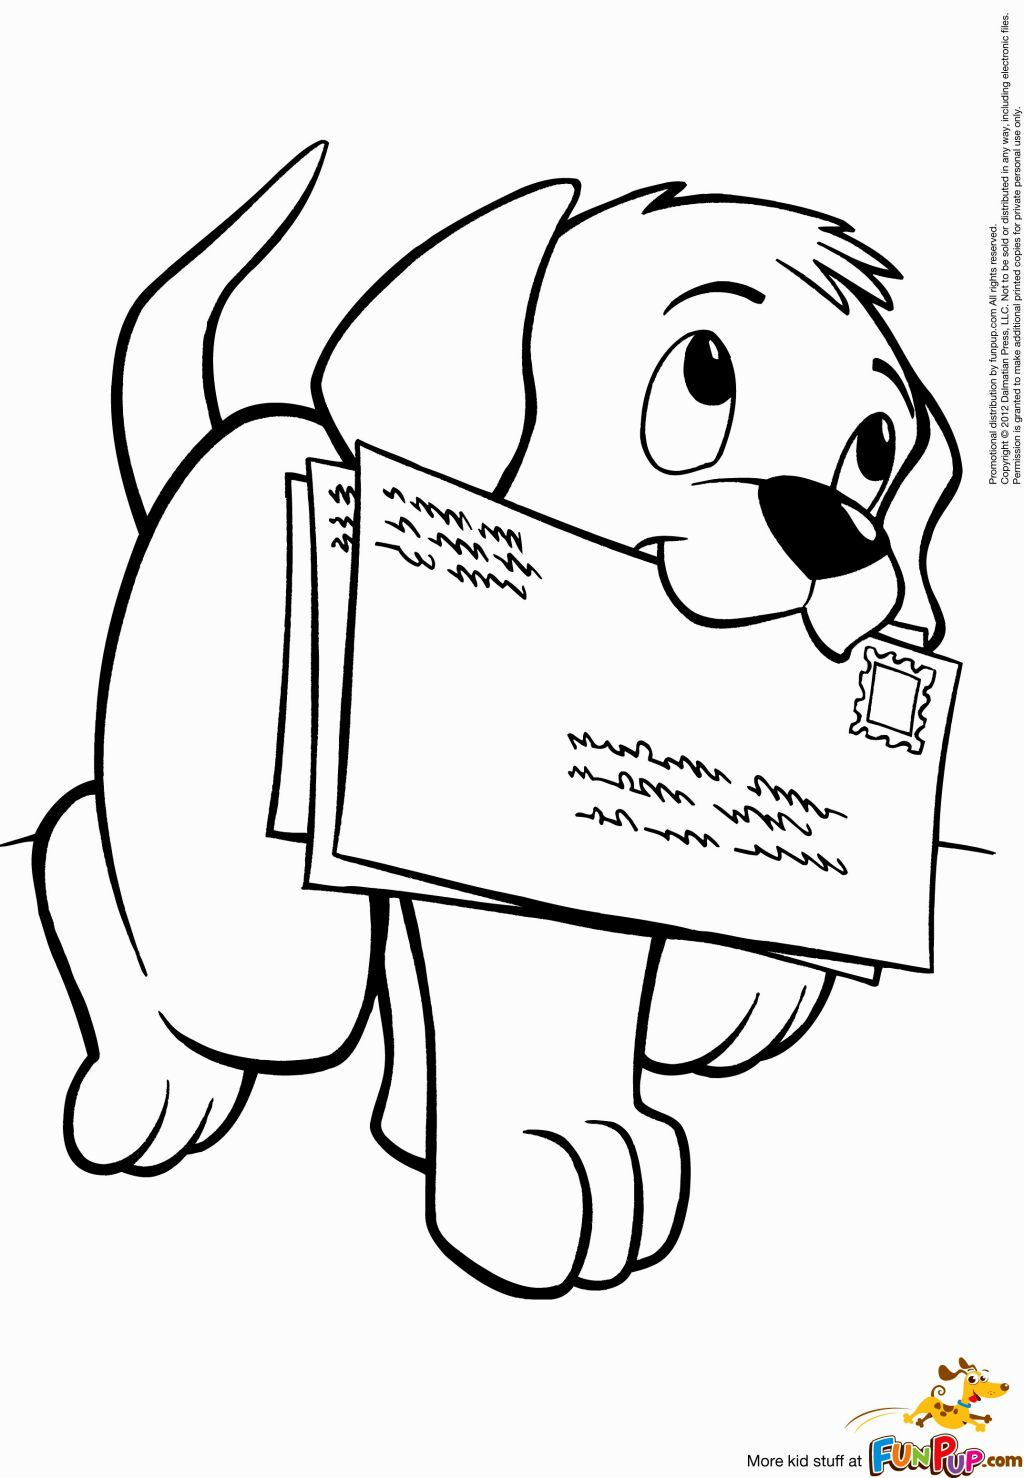 Little Puppy Coloring Pages Cute Puppy Coloring Pages Coloring Pages